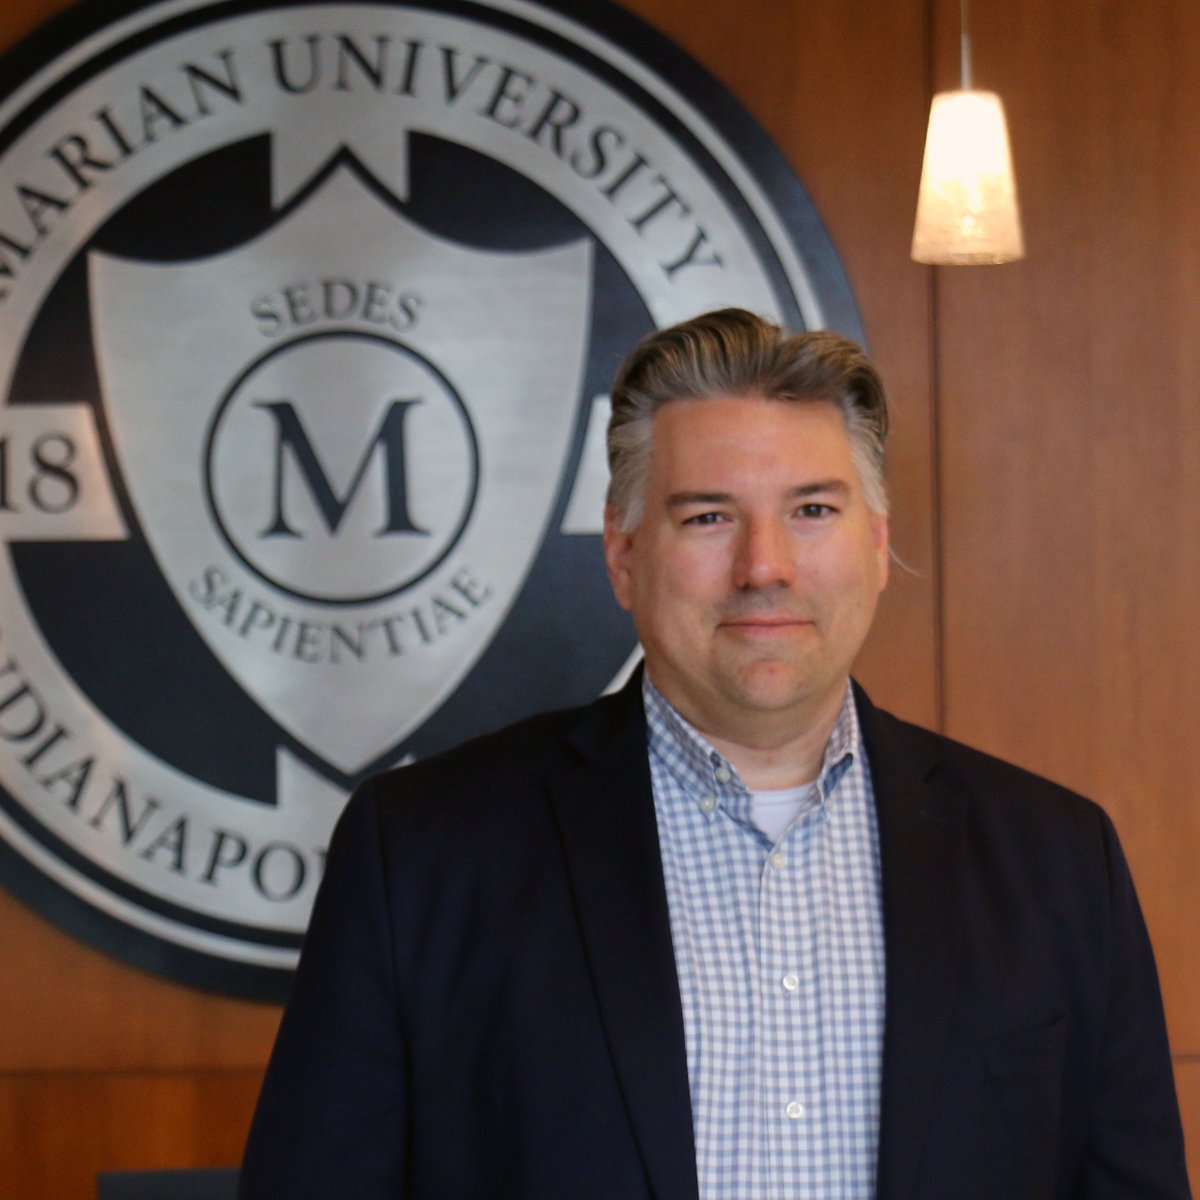 We are excited to announce the appointment of Dr. David Rusbasan as the new Dean of the Marian University College of Arts and Sciences. Read more at marian.edu/newsroom/newsi…